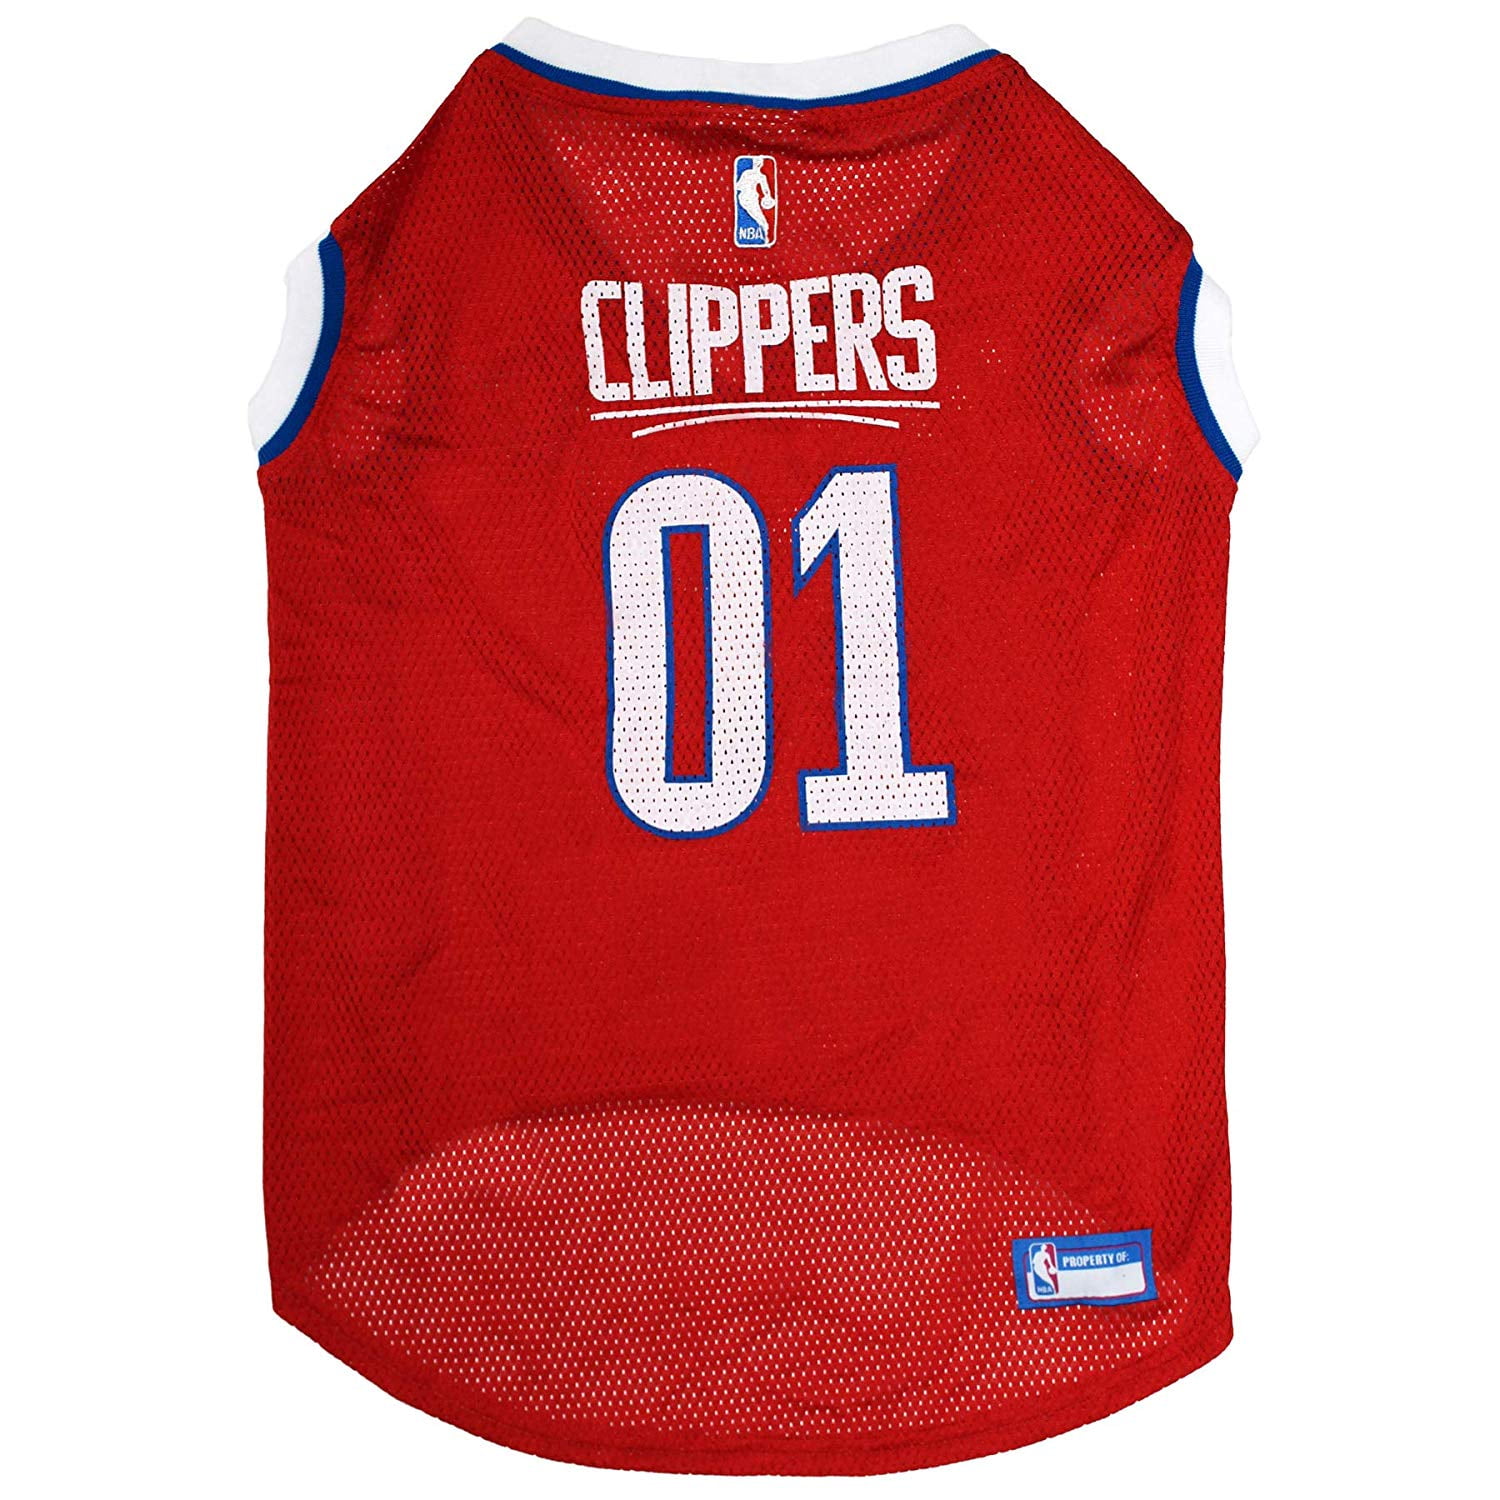 L.A. Clippers - L.A. Clippers City Edition